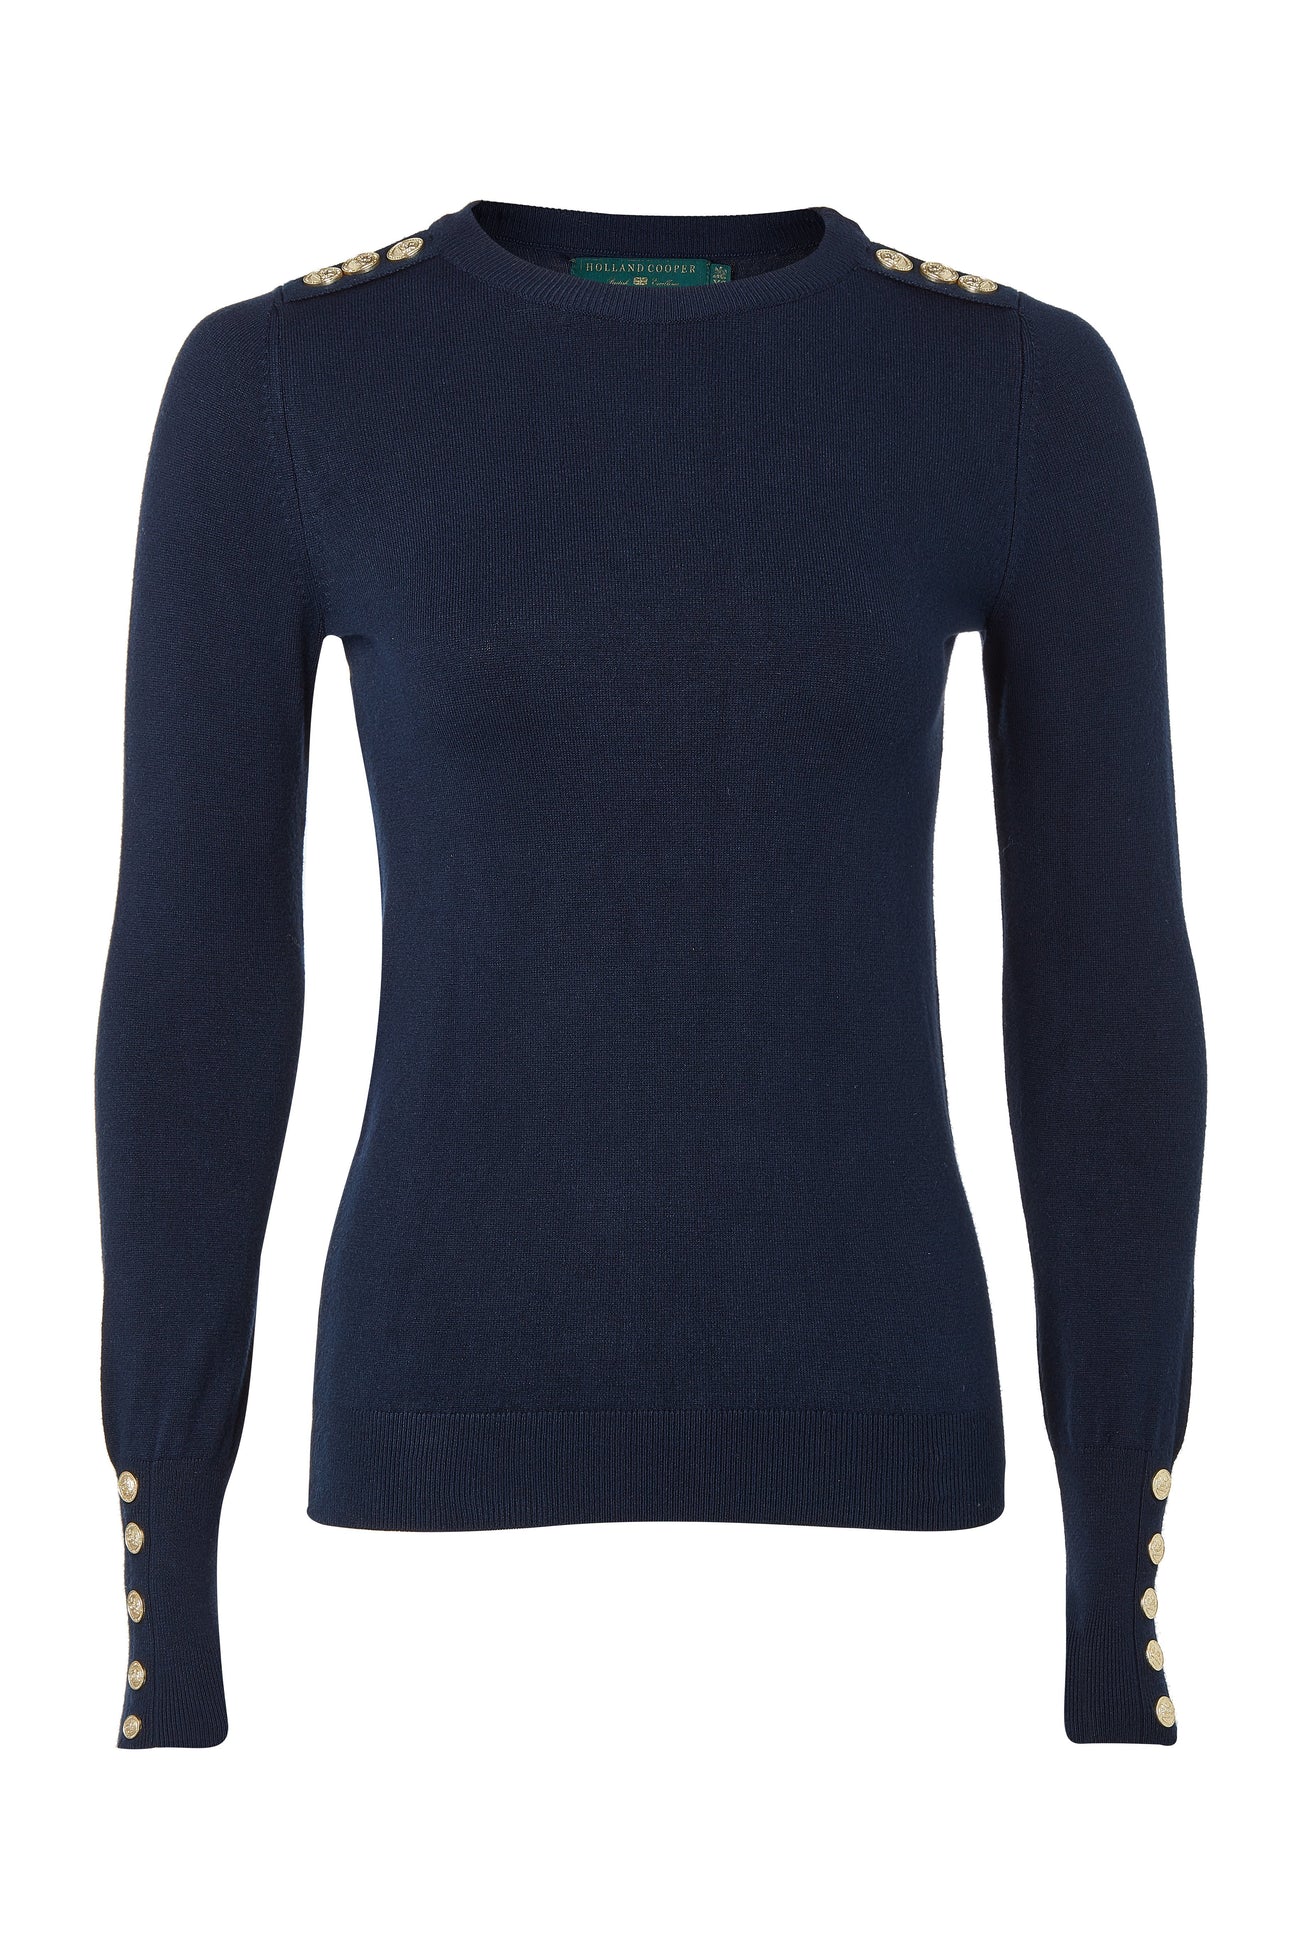 Buttoned Knit Crew Neck (Ink Navy) – Holland Cooper